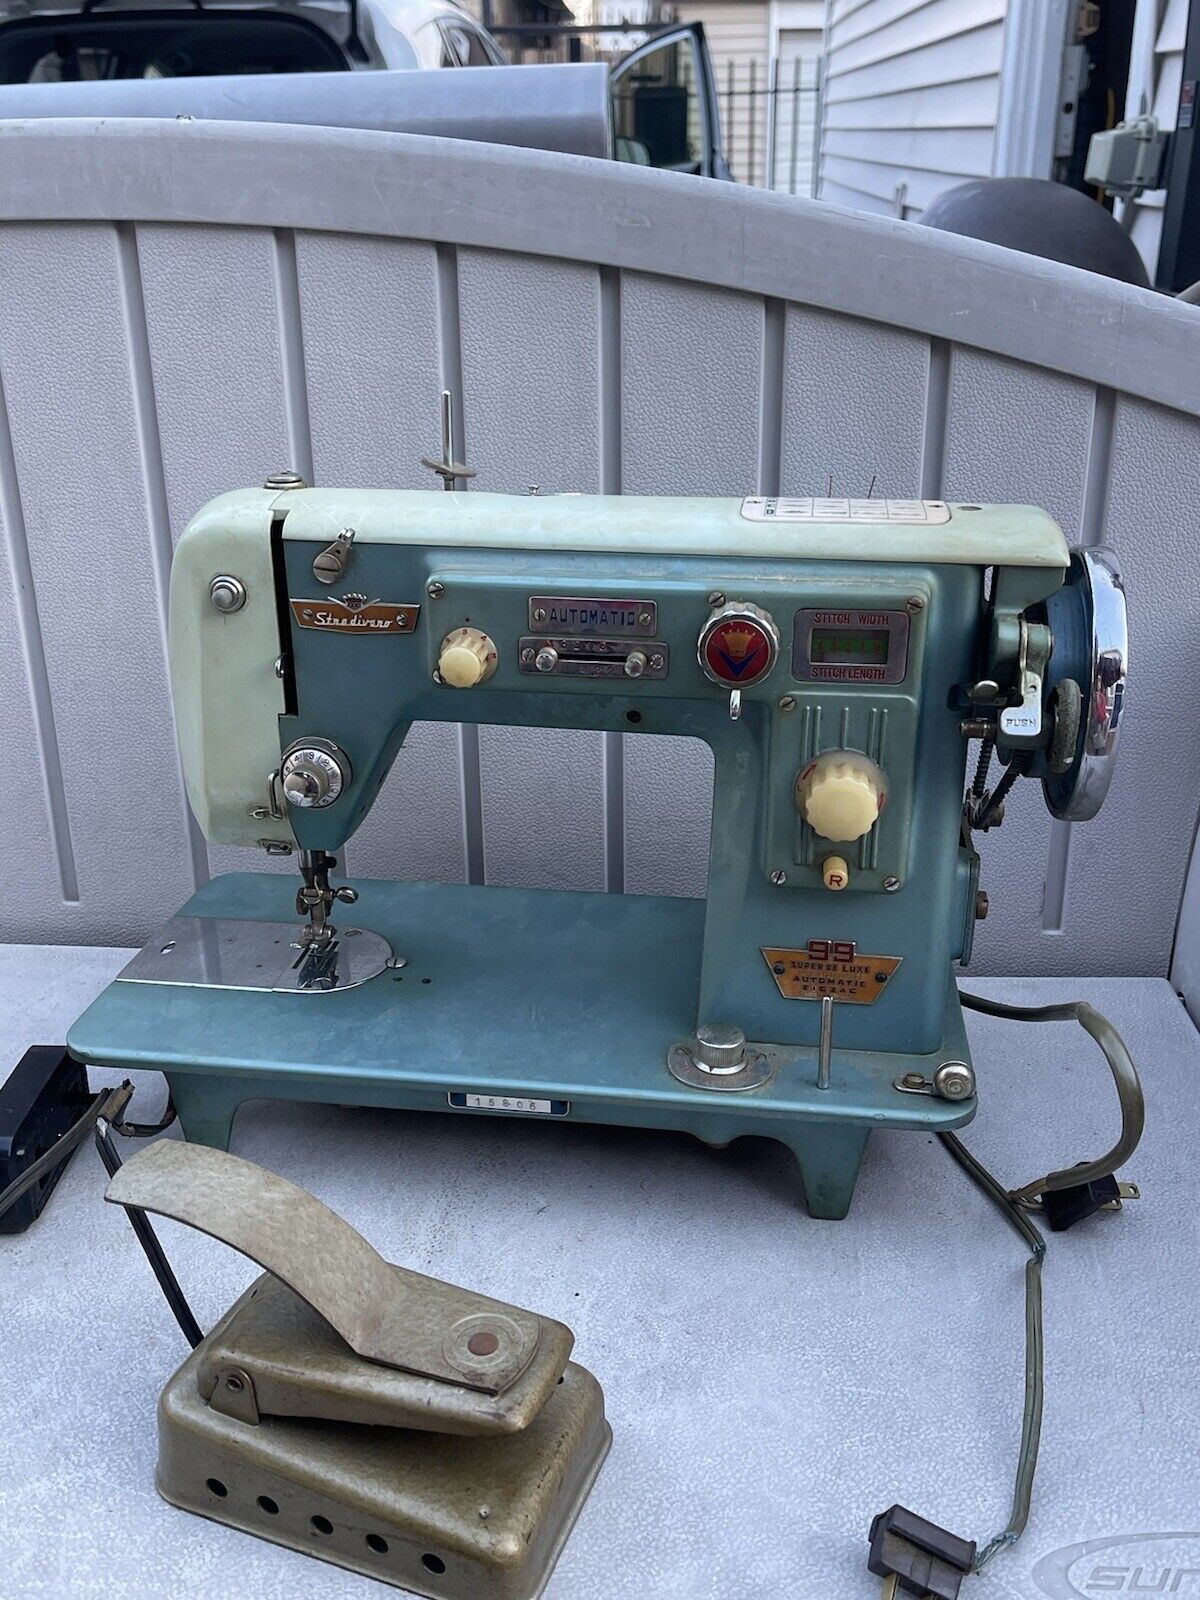 Vintage Stradivaro 99 Super De Luxe Precision Electric Sewing Machine By Toyota